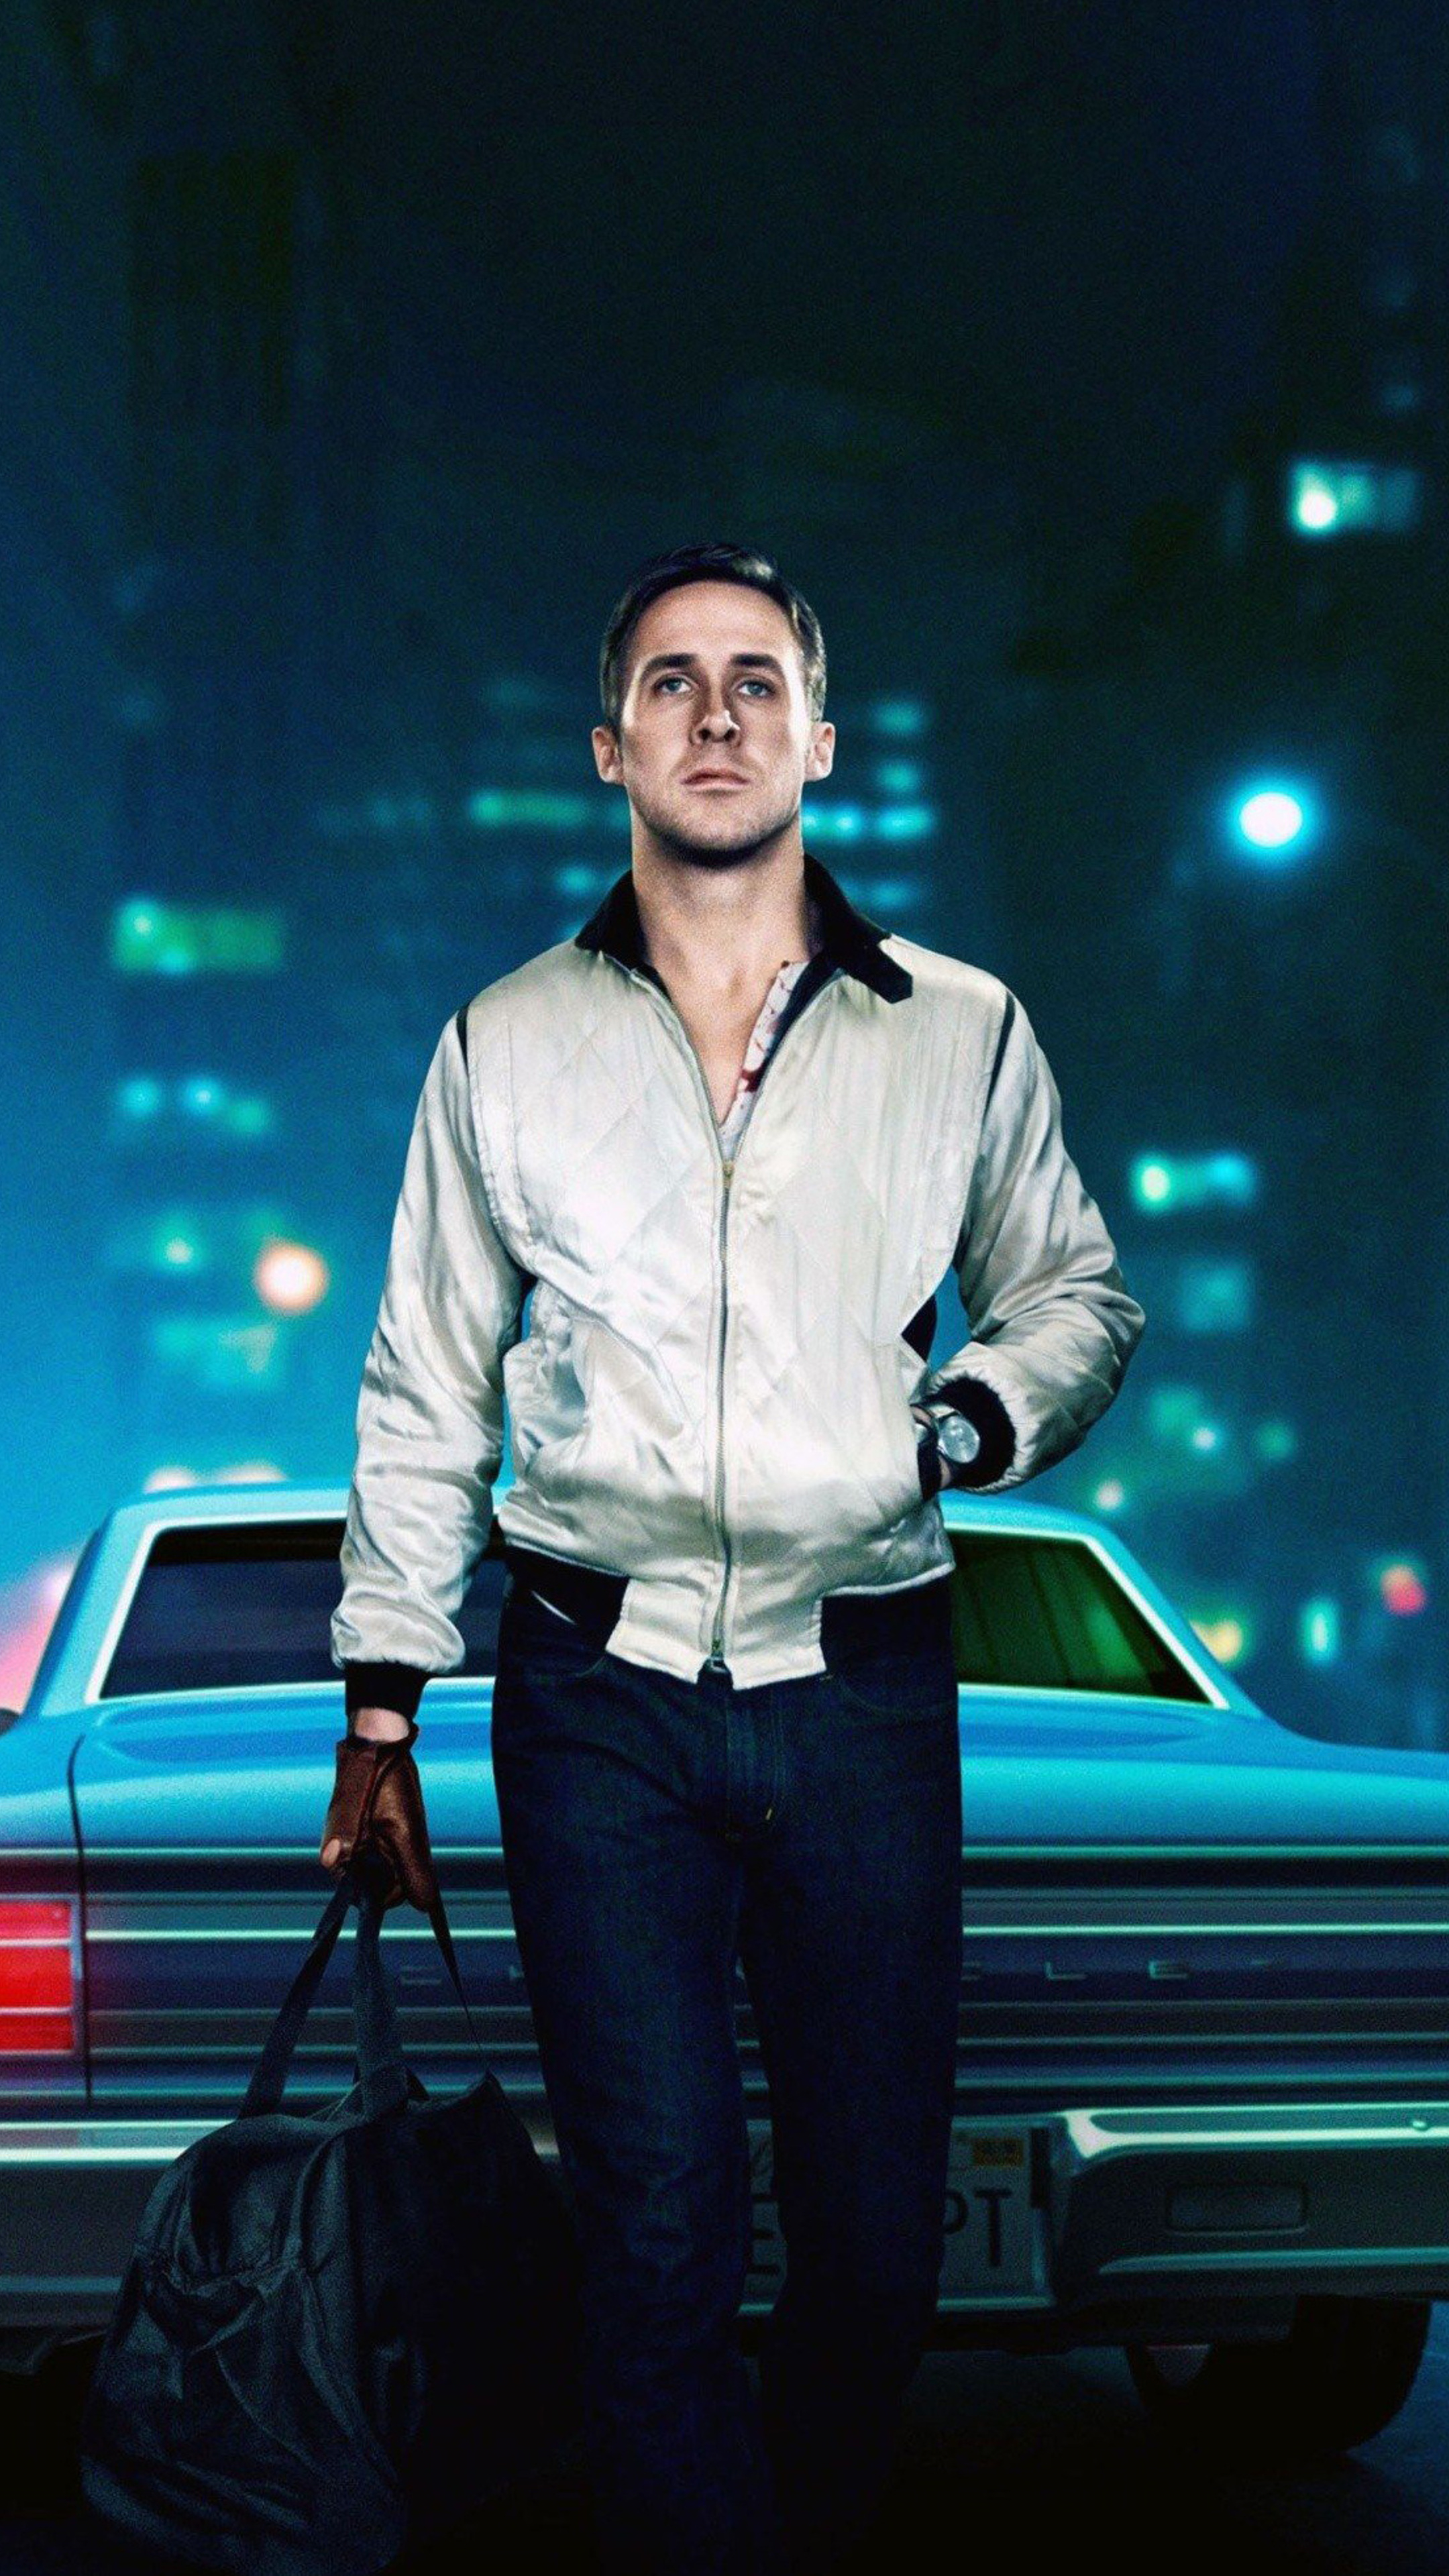 Ryan Gosling: Took part of the Driver in a 2011 American action drama film, Drive. 2160x3840 4K Wallpaper.